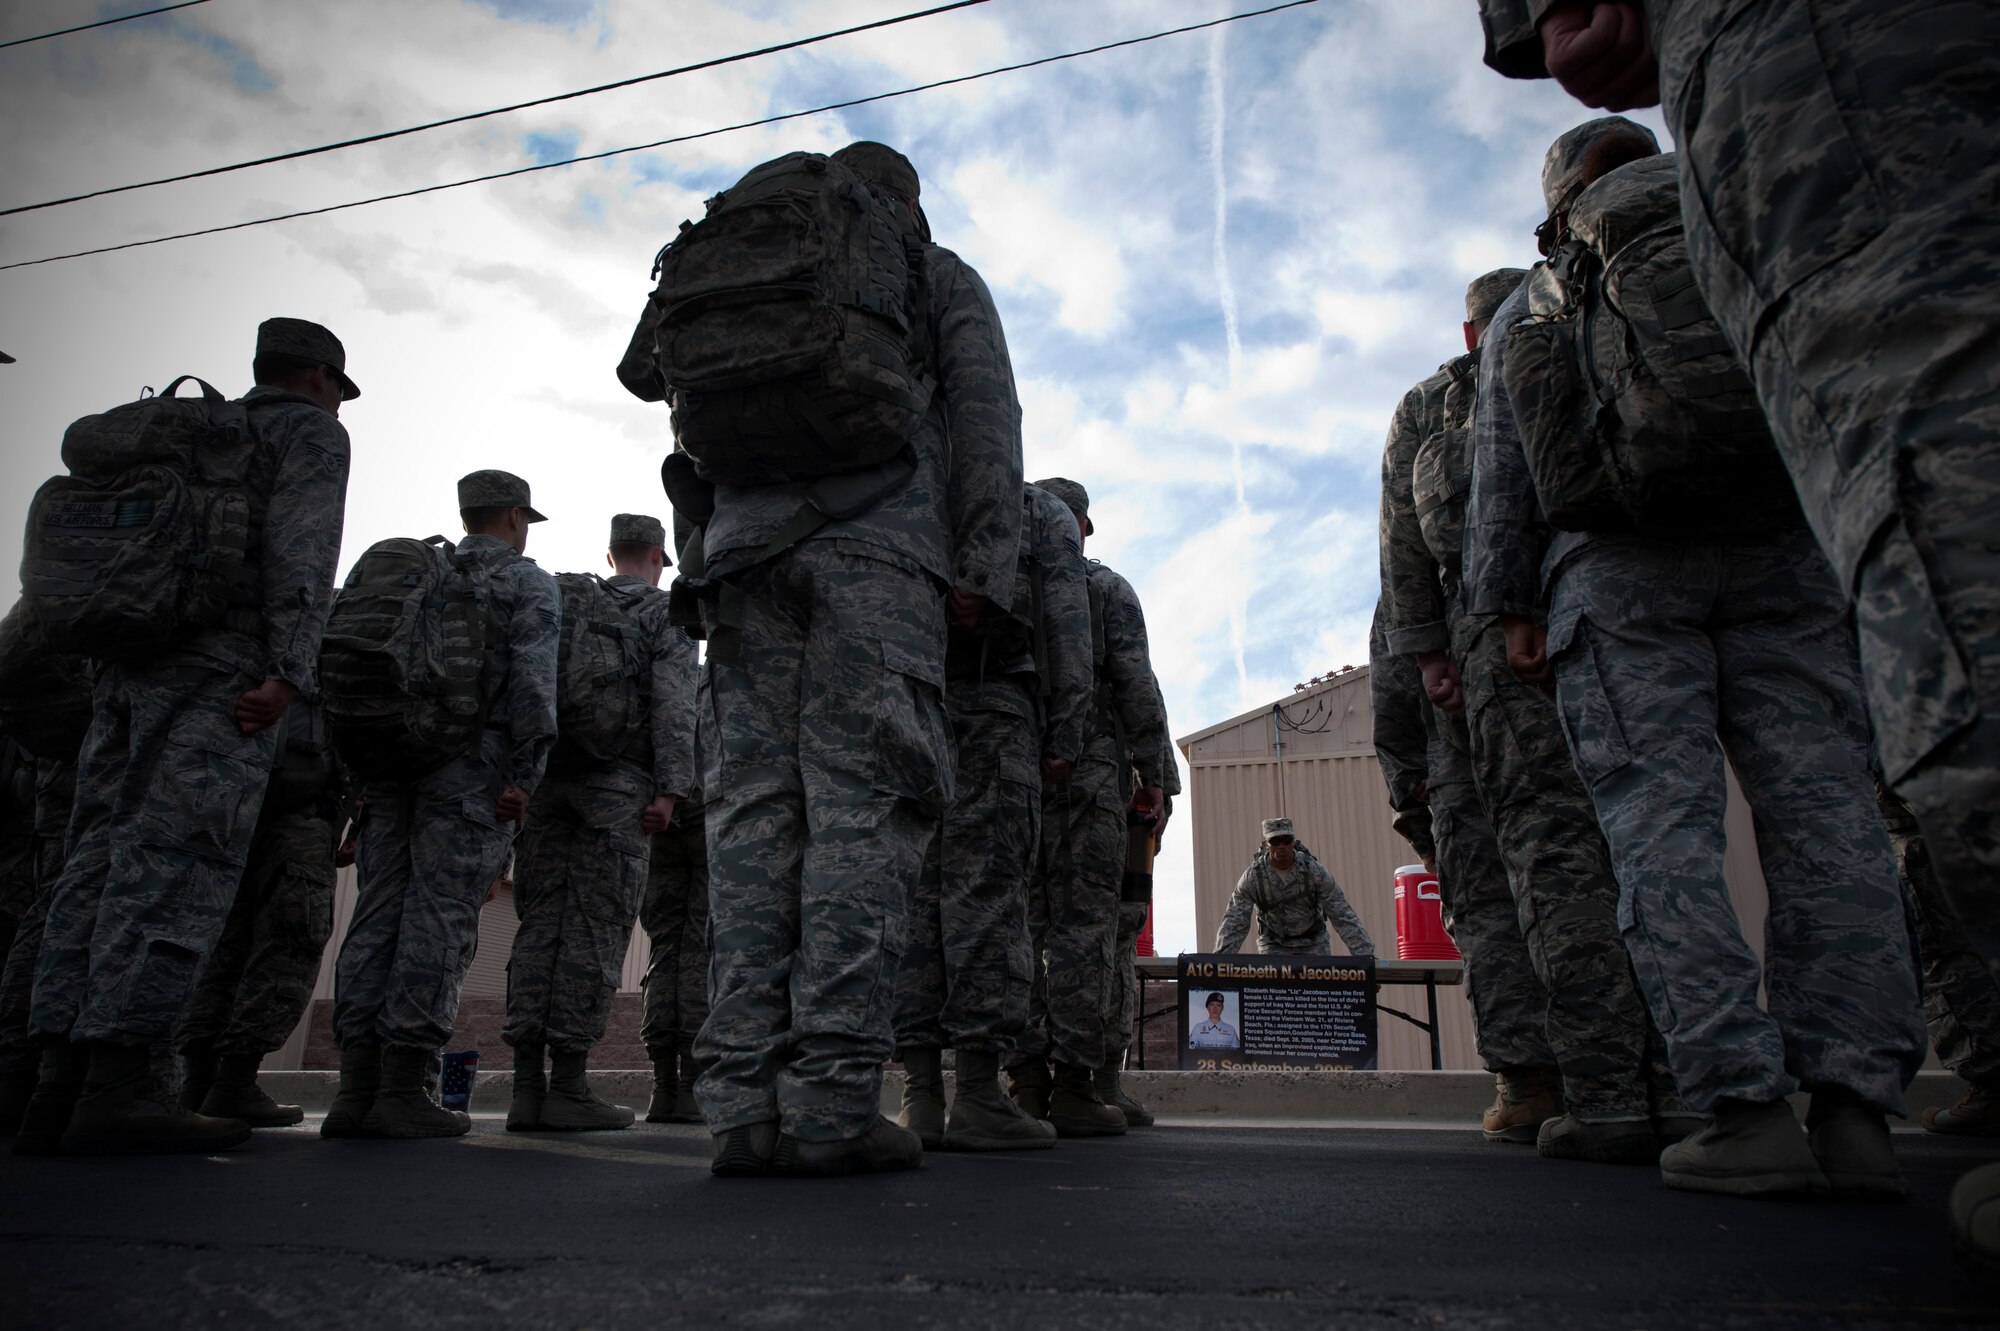 Lt. Col. Joseph Ringer, 99th Security Forces Squadron commander, leads his formation in recognition of Airman First Class Elizabeth Jacobson during the National Police Week 10K memorial ruck march at Nellis Air Force Base, Nev., May 13, 2015. Jacobson, a security forces Airman who was killed performing convoy security in support of Operation Iraqi Freedom, was honored along with other fallen members of the law enforcement community at the numerous stops made by the formation along their route. (U.S. Air Force photo by Senior Airman Joshua Kleinholz)